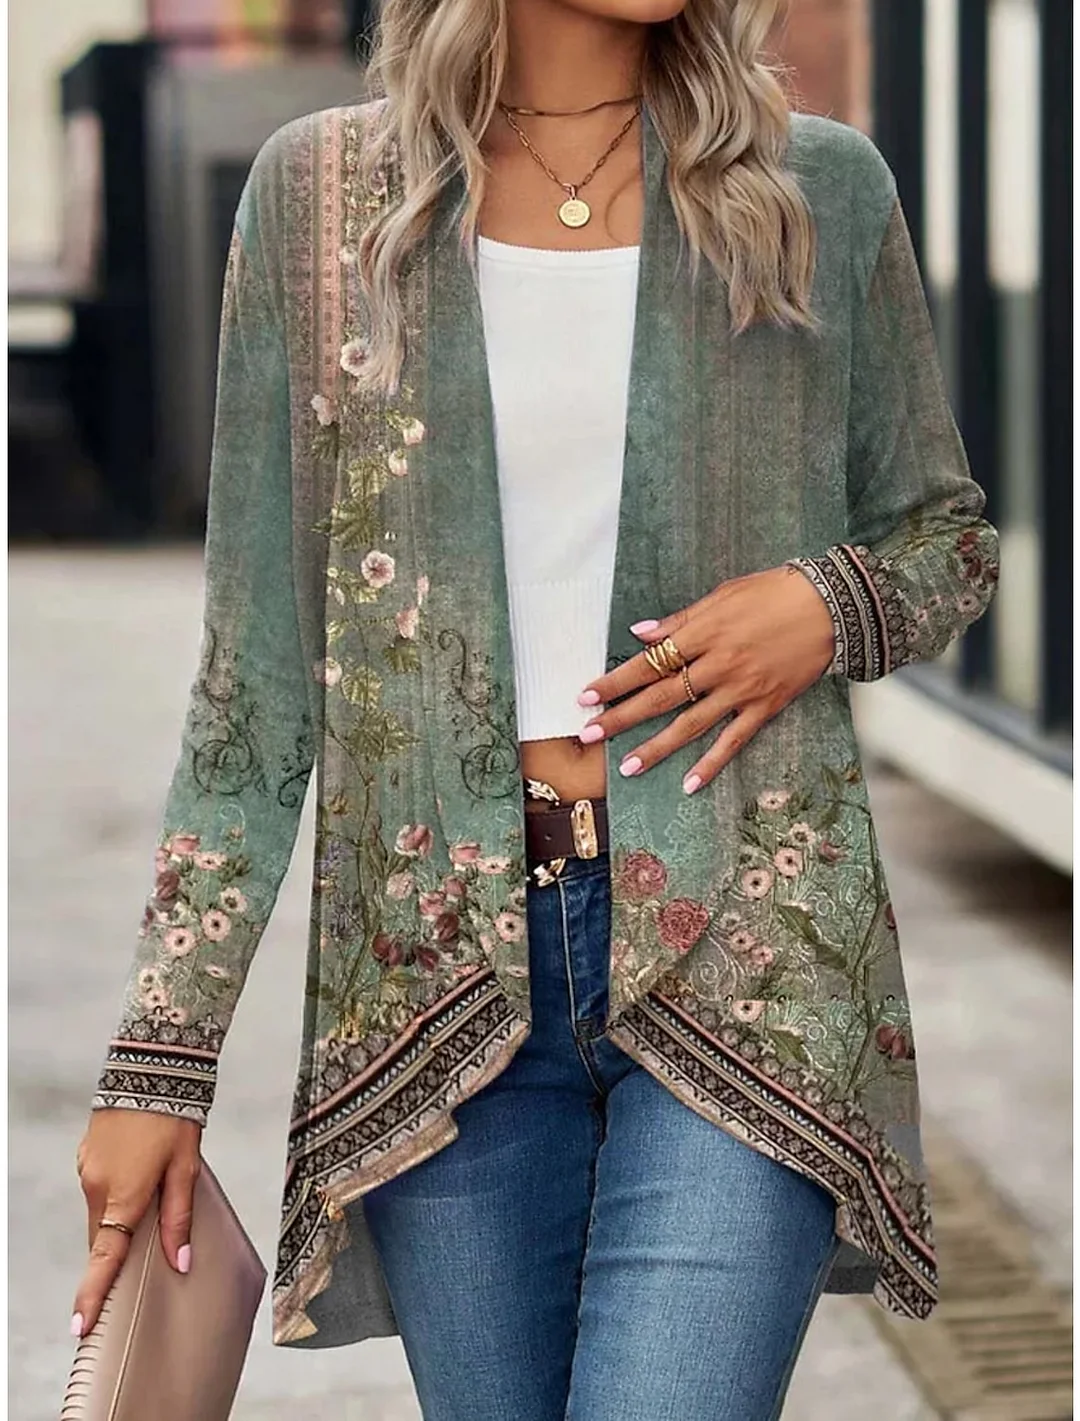 Women's Casual Floral Breathable Loose Fit Outerwear.